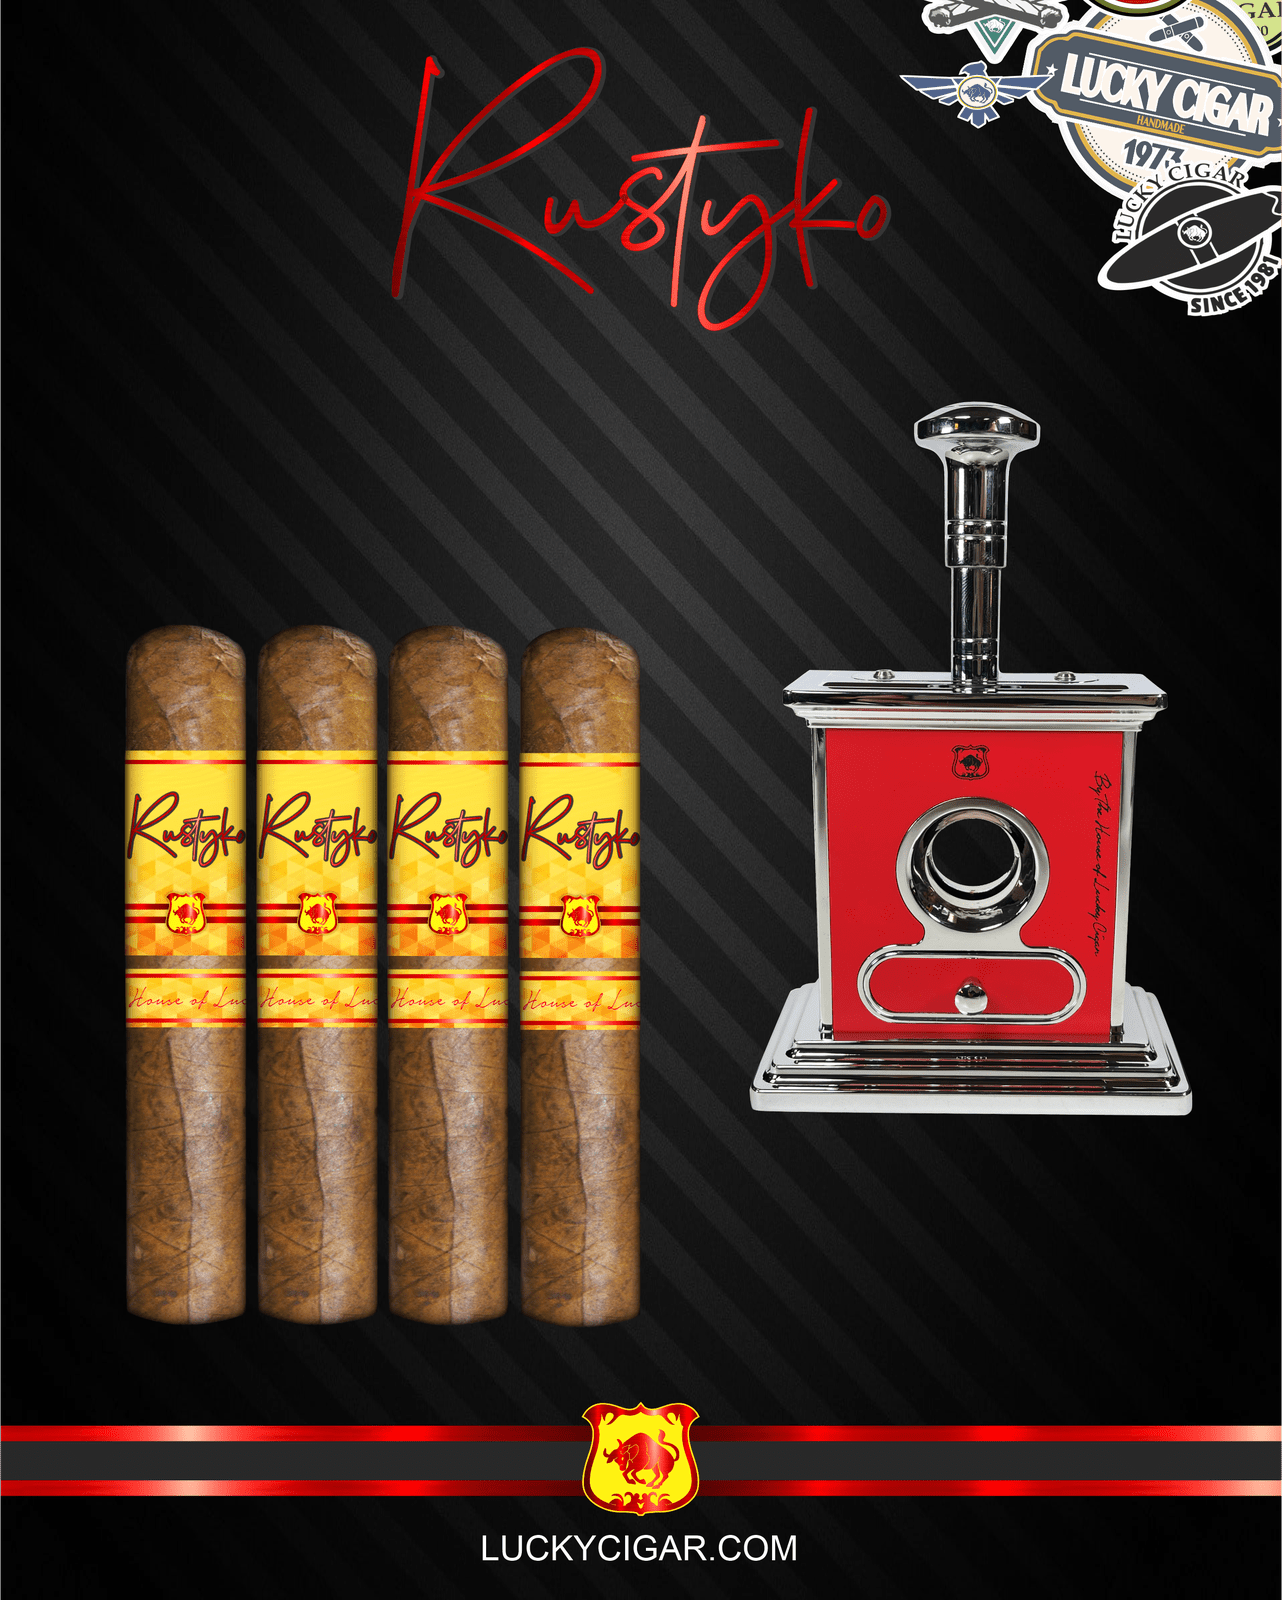 Infused Cigars: Rustyko Robusto 5x54 Cigars - Set of 4 with Red Table Cutter